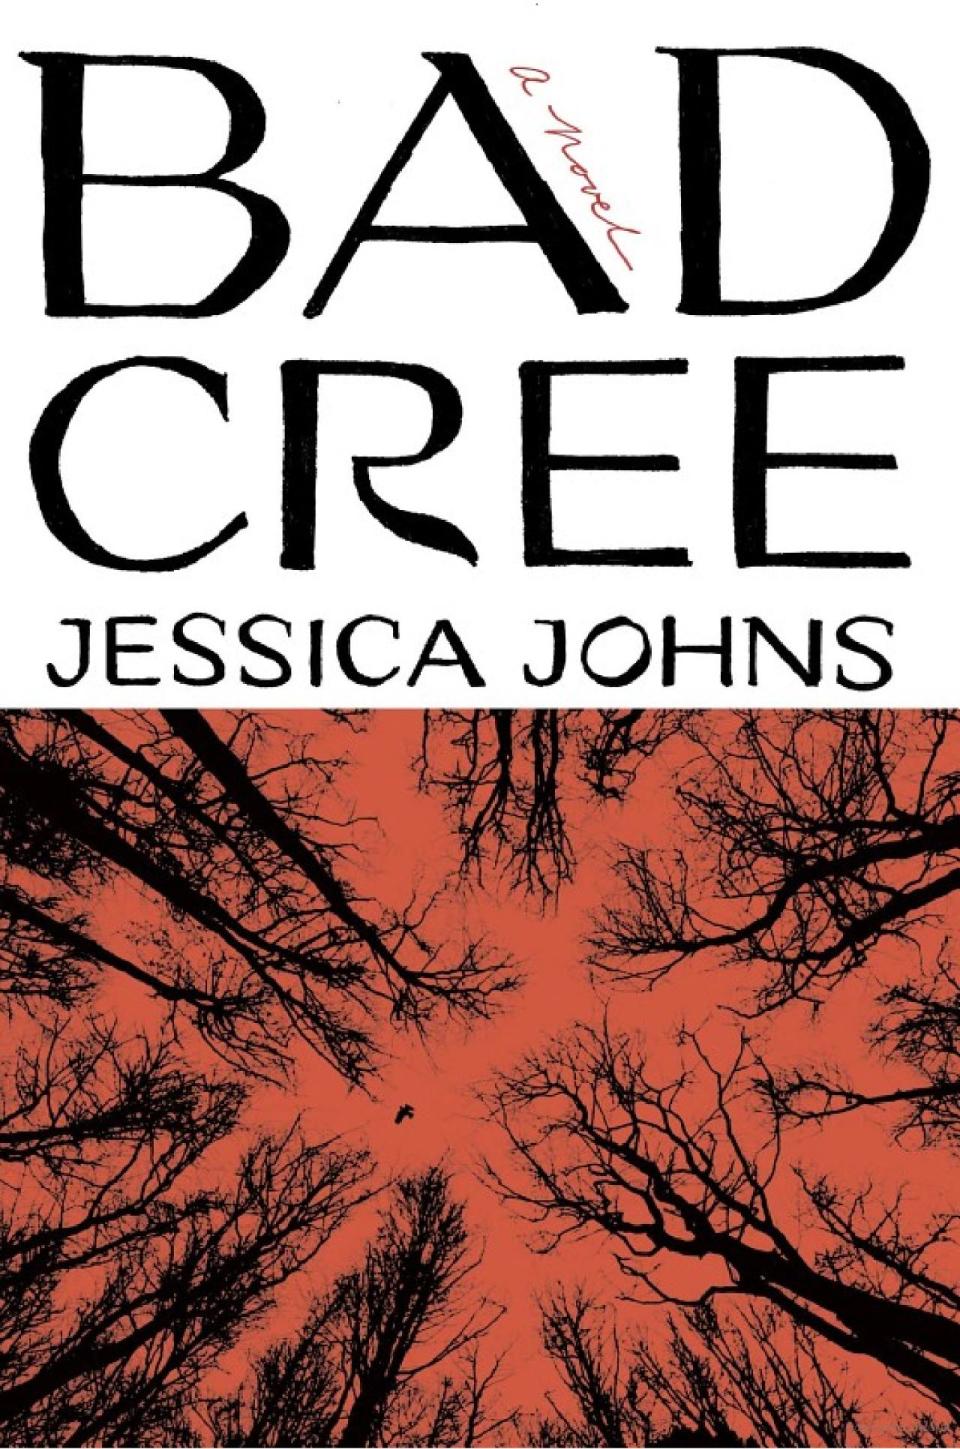 "Bad Cree" by Jessica Johns